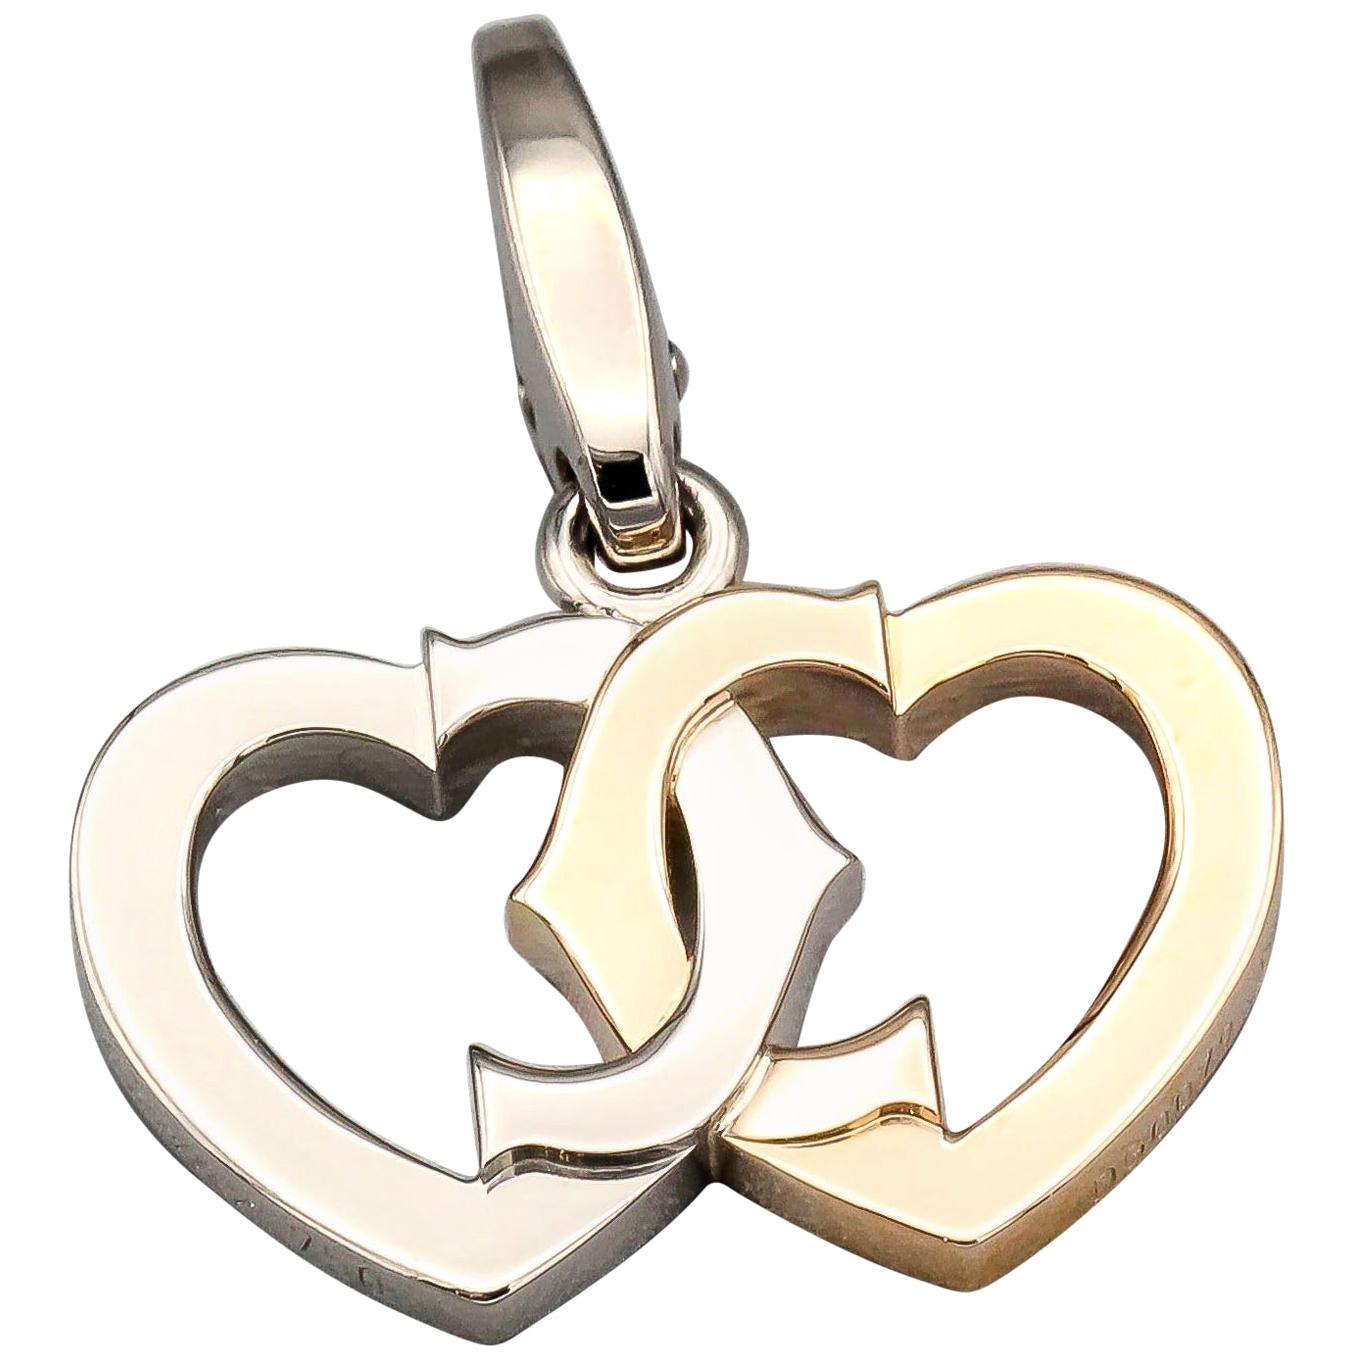 Cartier 18 Karat White and Yellow Gold Double Heart Logo Charm